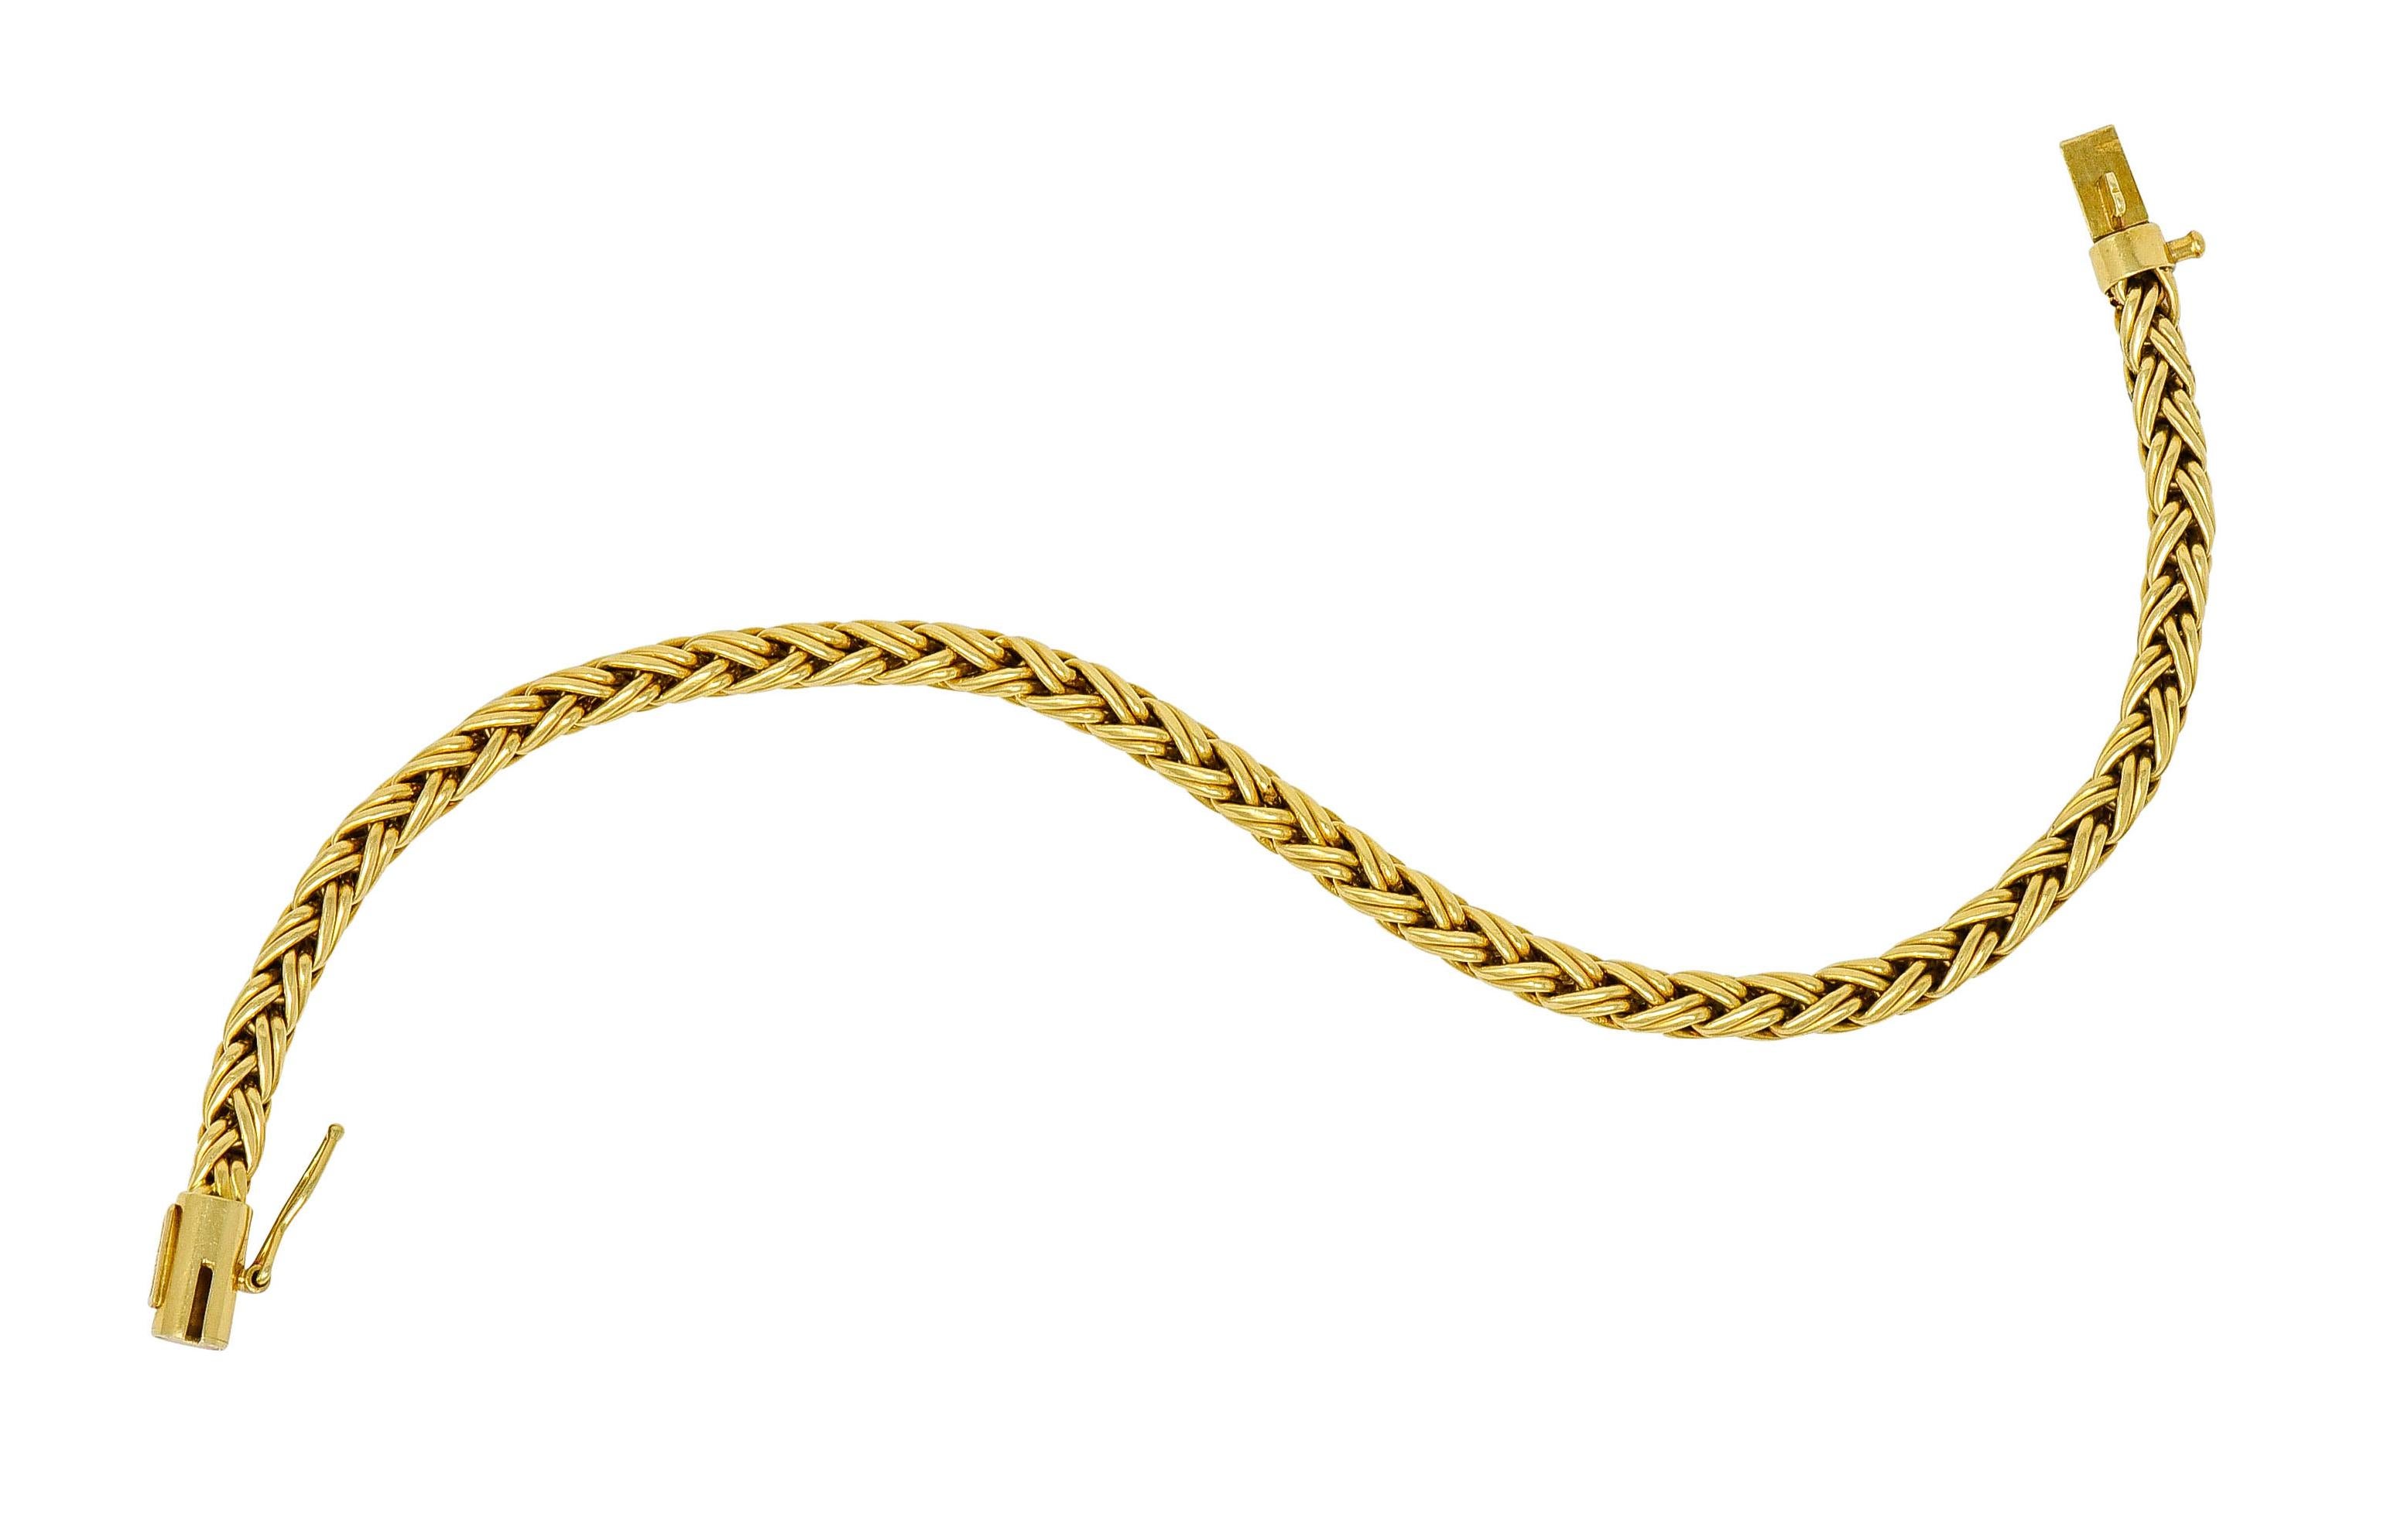 Bracelet is designed as a polished gold woven wheat chain

Completed by a barrel clasp with a figure eight safety

Fully signed Tiffany & Co.

Stamped 750 for 18 karat gold

Circa: 1980s

Length: 7 3/8 inches

Width: 3/16 inch

Total weight: 12.6